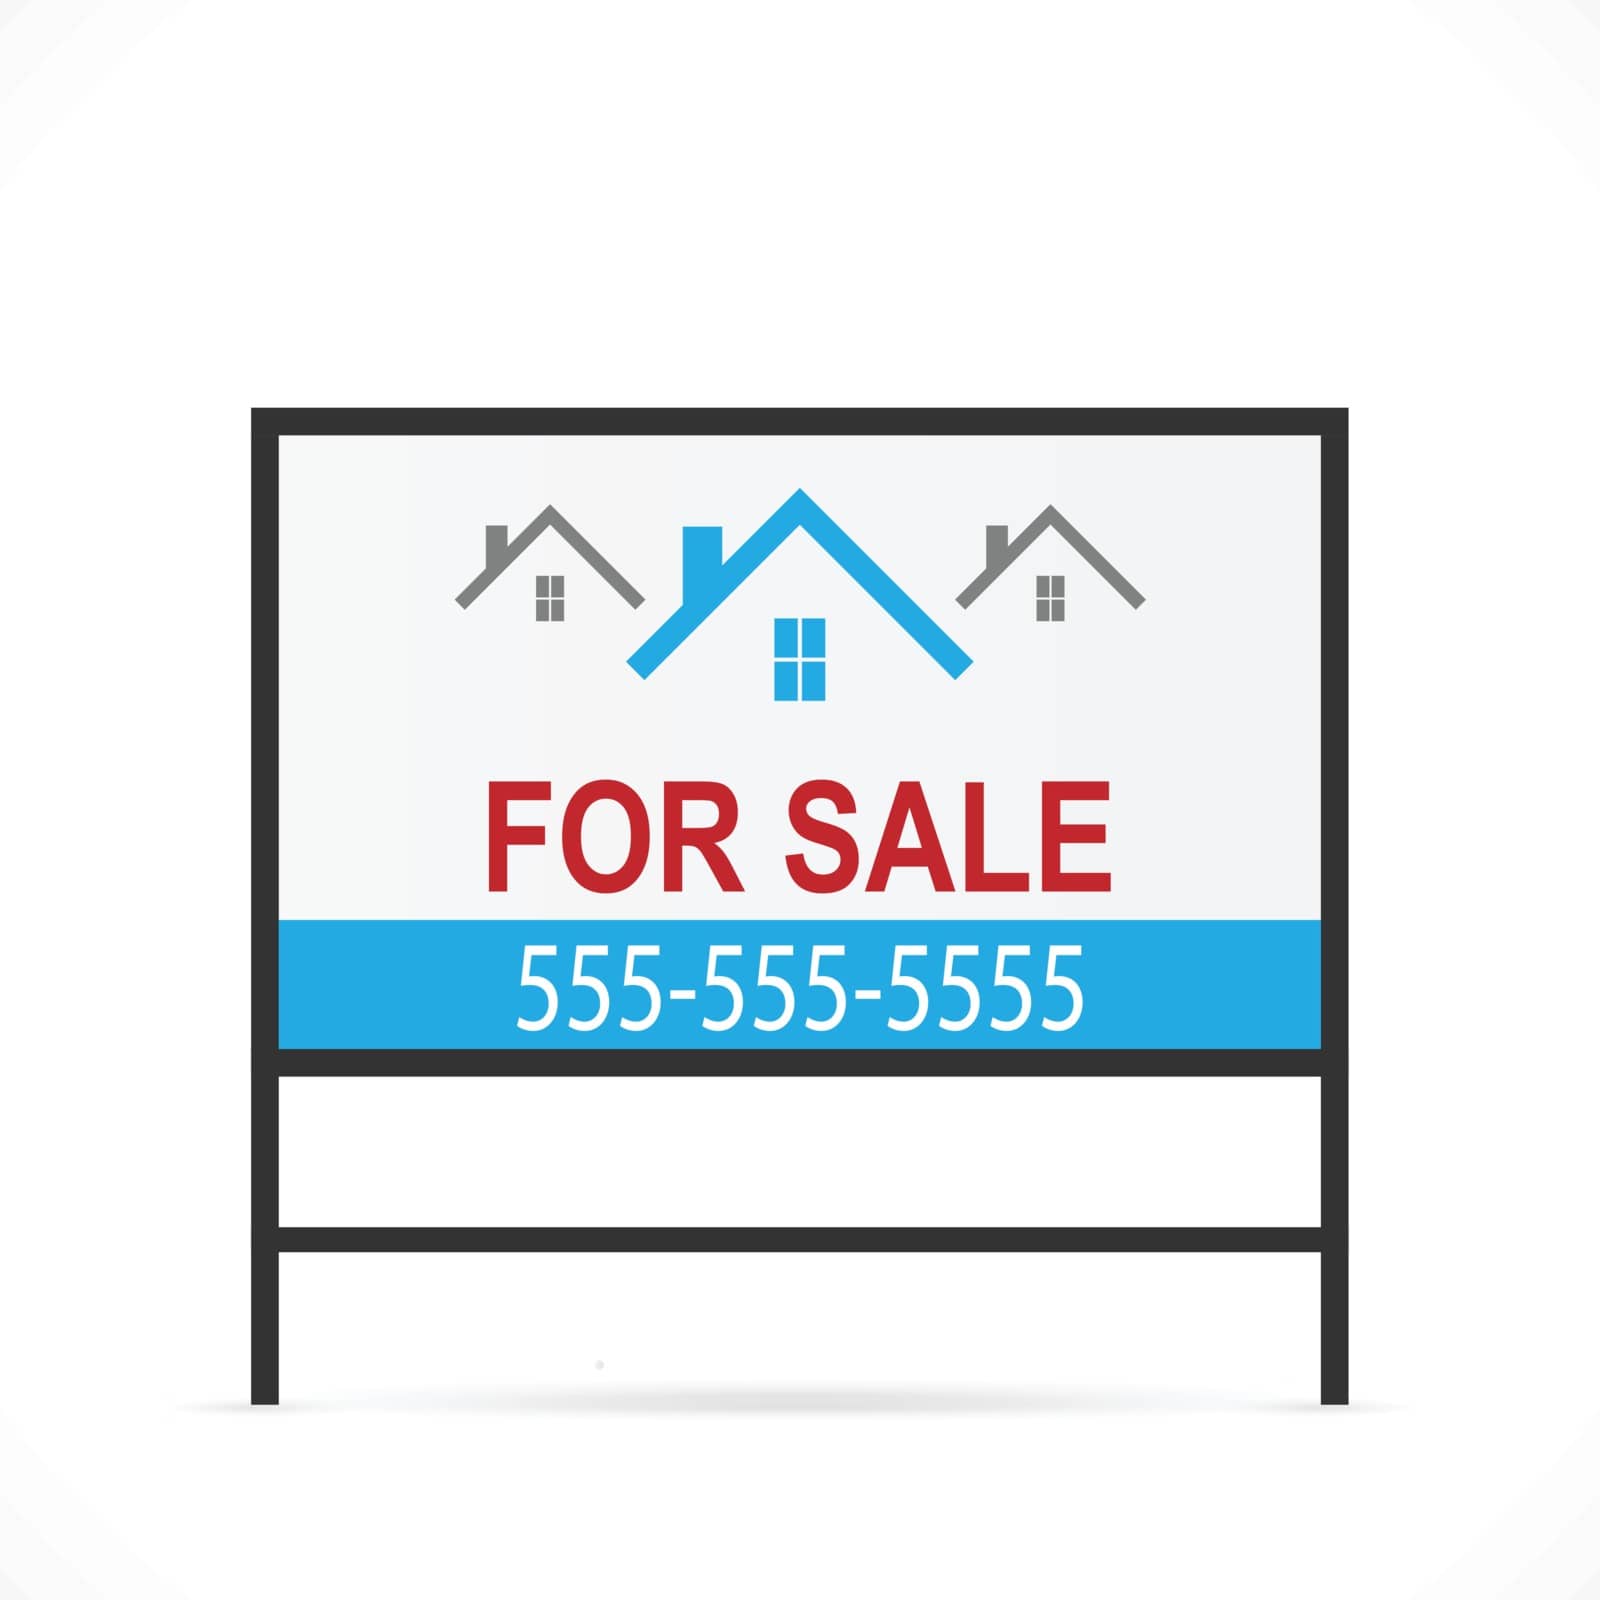 For Sale Sign Illustration by nmarques74